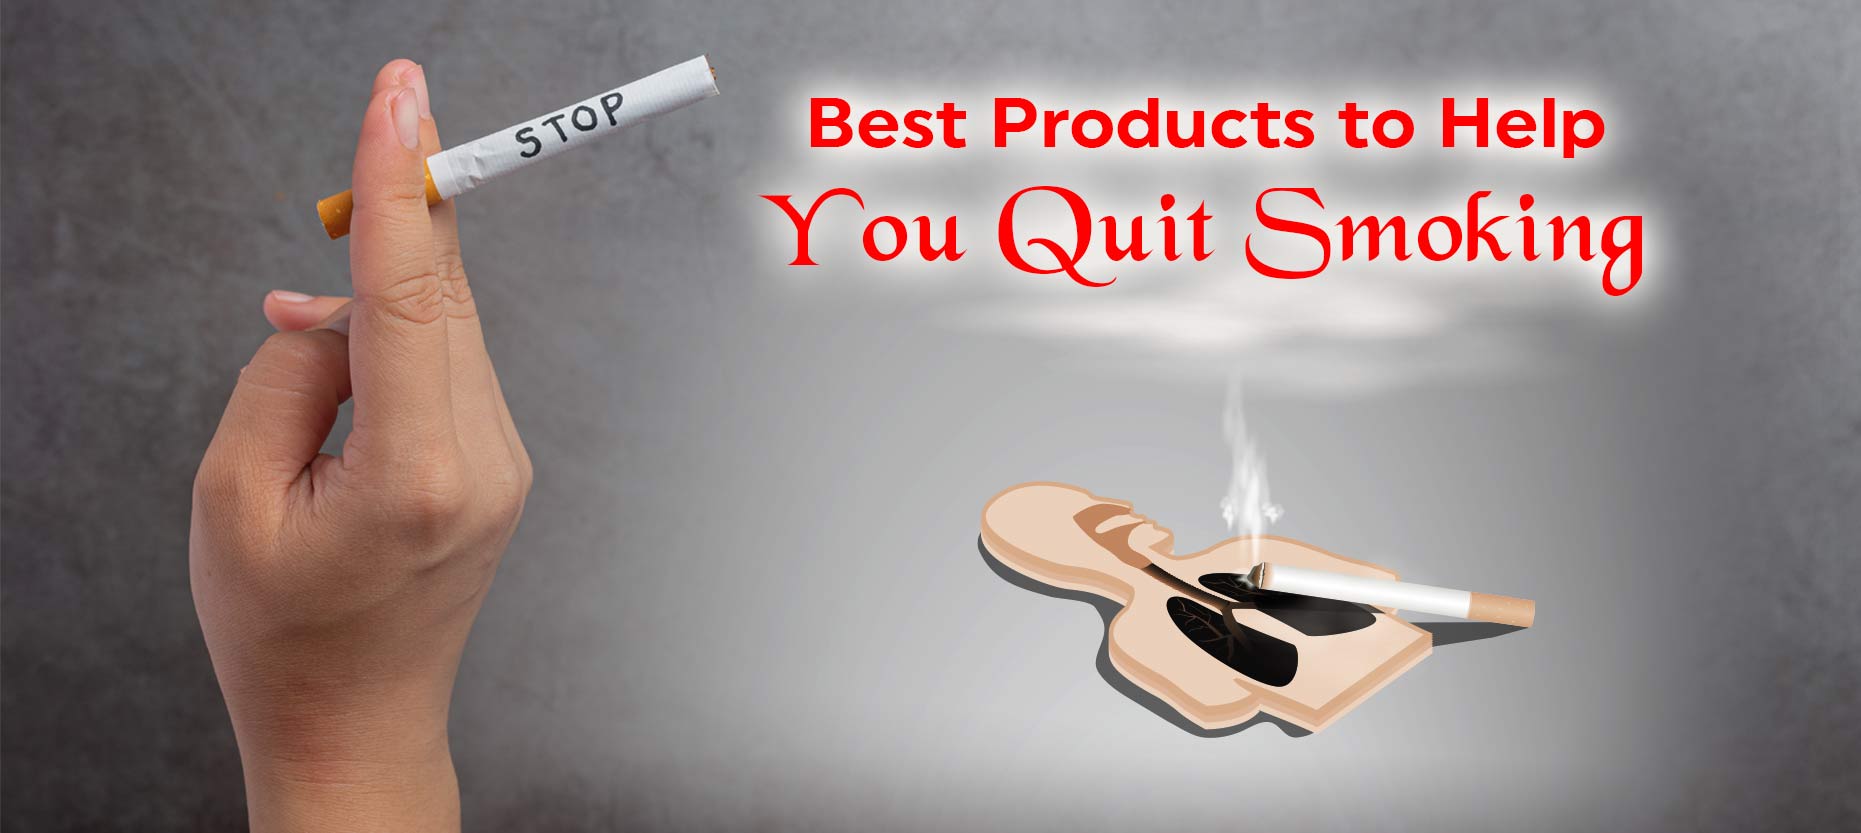 Best Products to Help You Quit Smoking